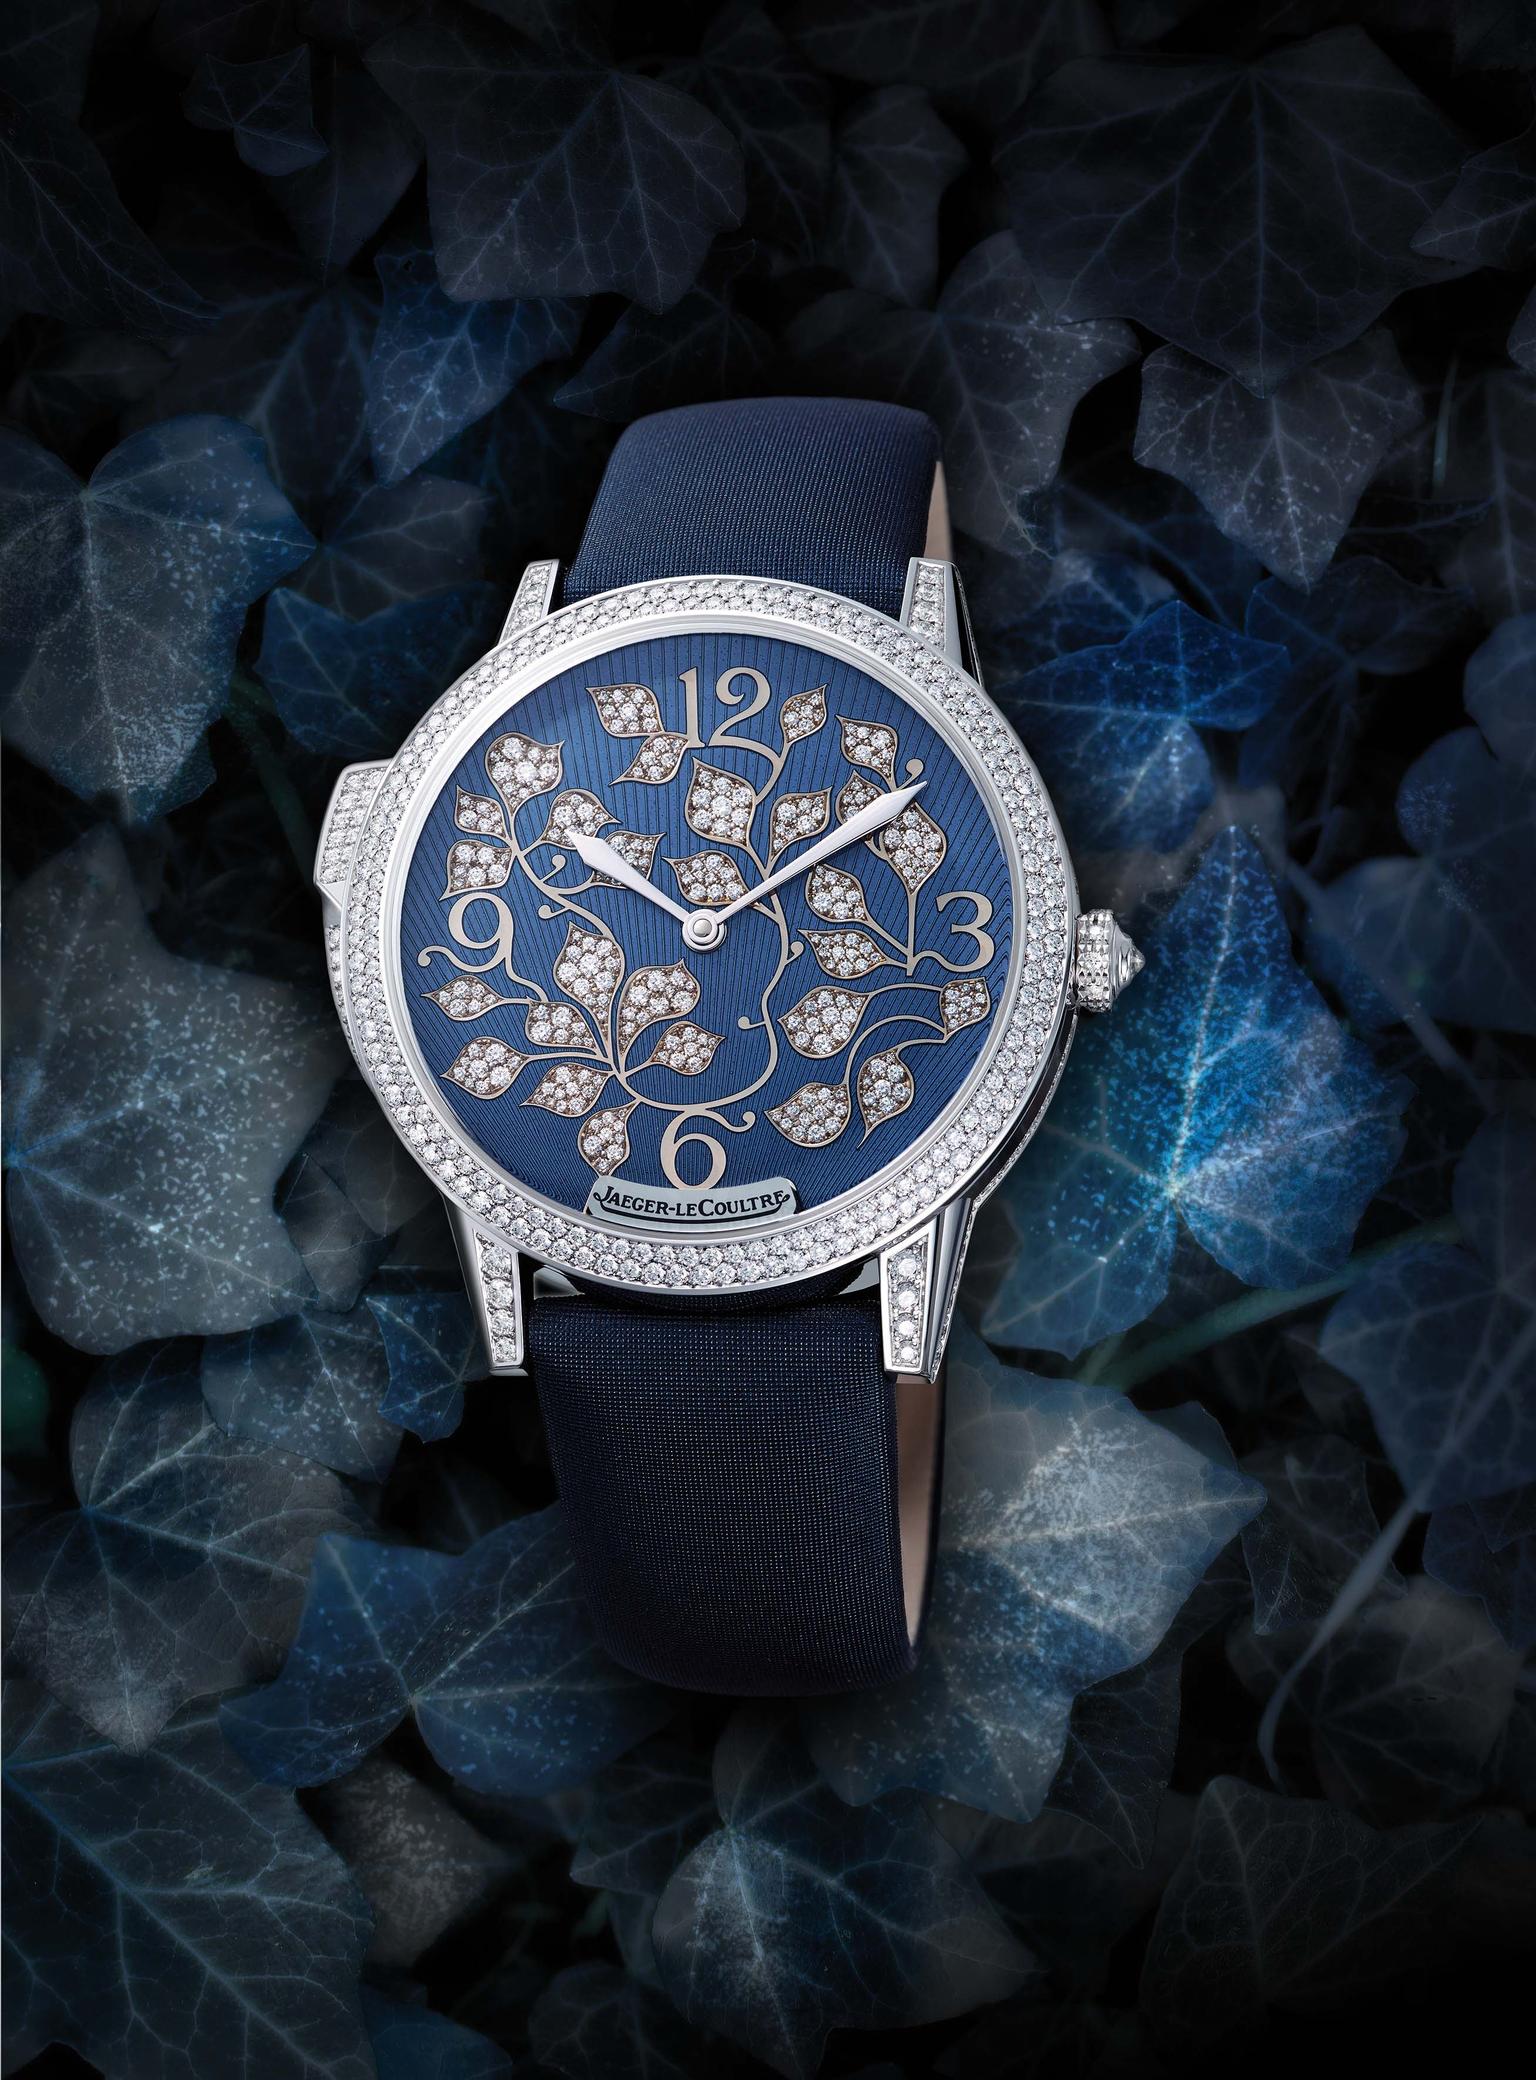 The new Jaeger-LeCoultre Rendez-Vous Ivy Minute Repeater watch for women mmediately seduces the eye with its snow-set diamond ivy leaves that swirl across the deep blue enamel dial, which is decorated with a sunburst guilloché motif.